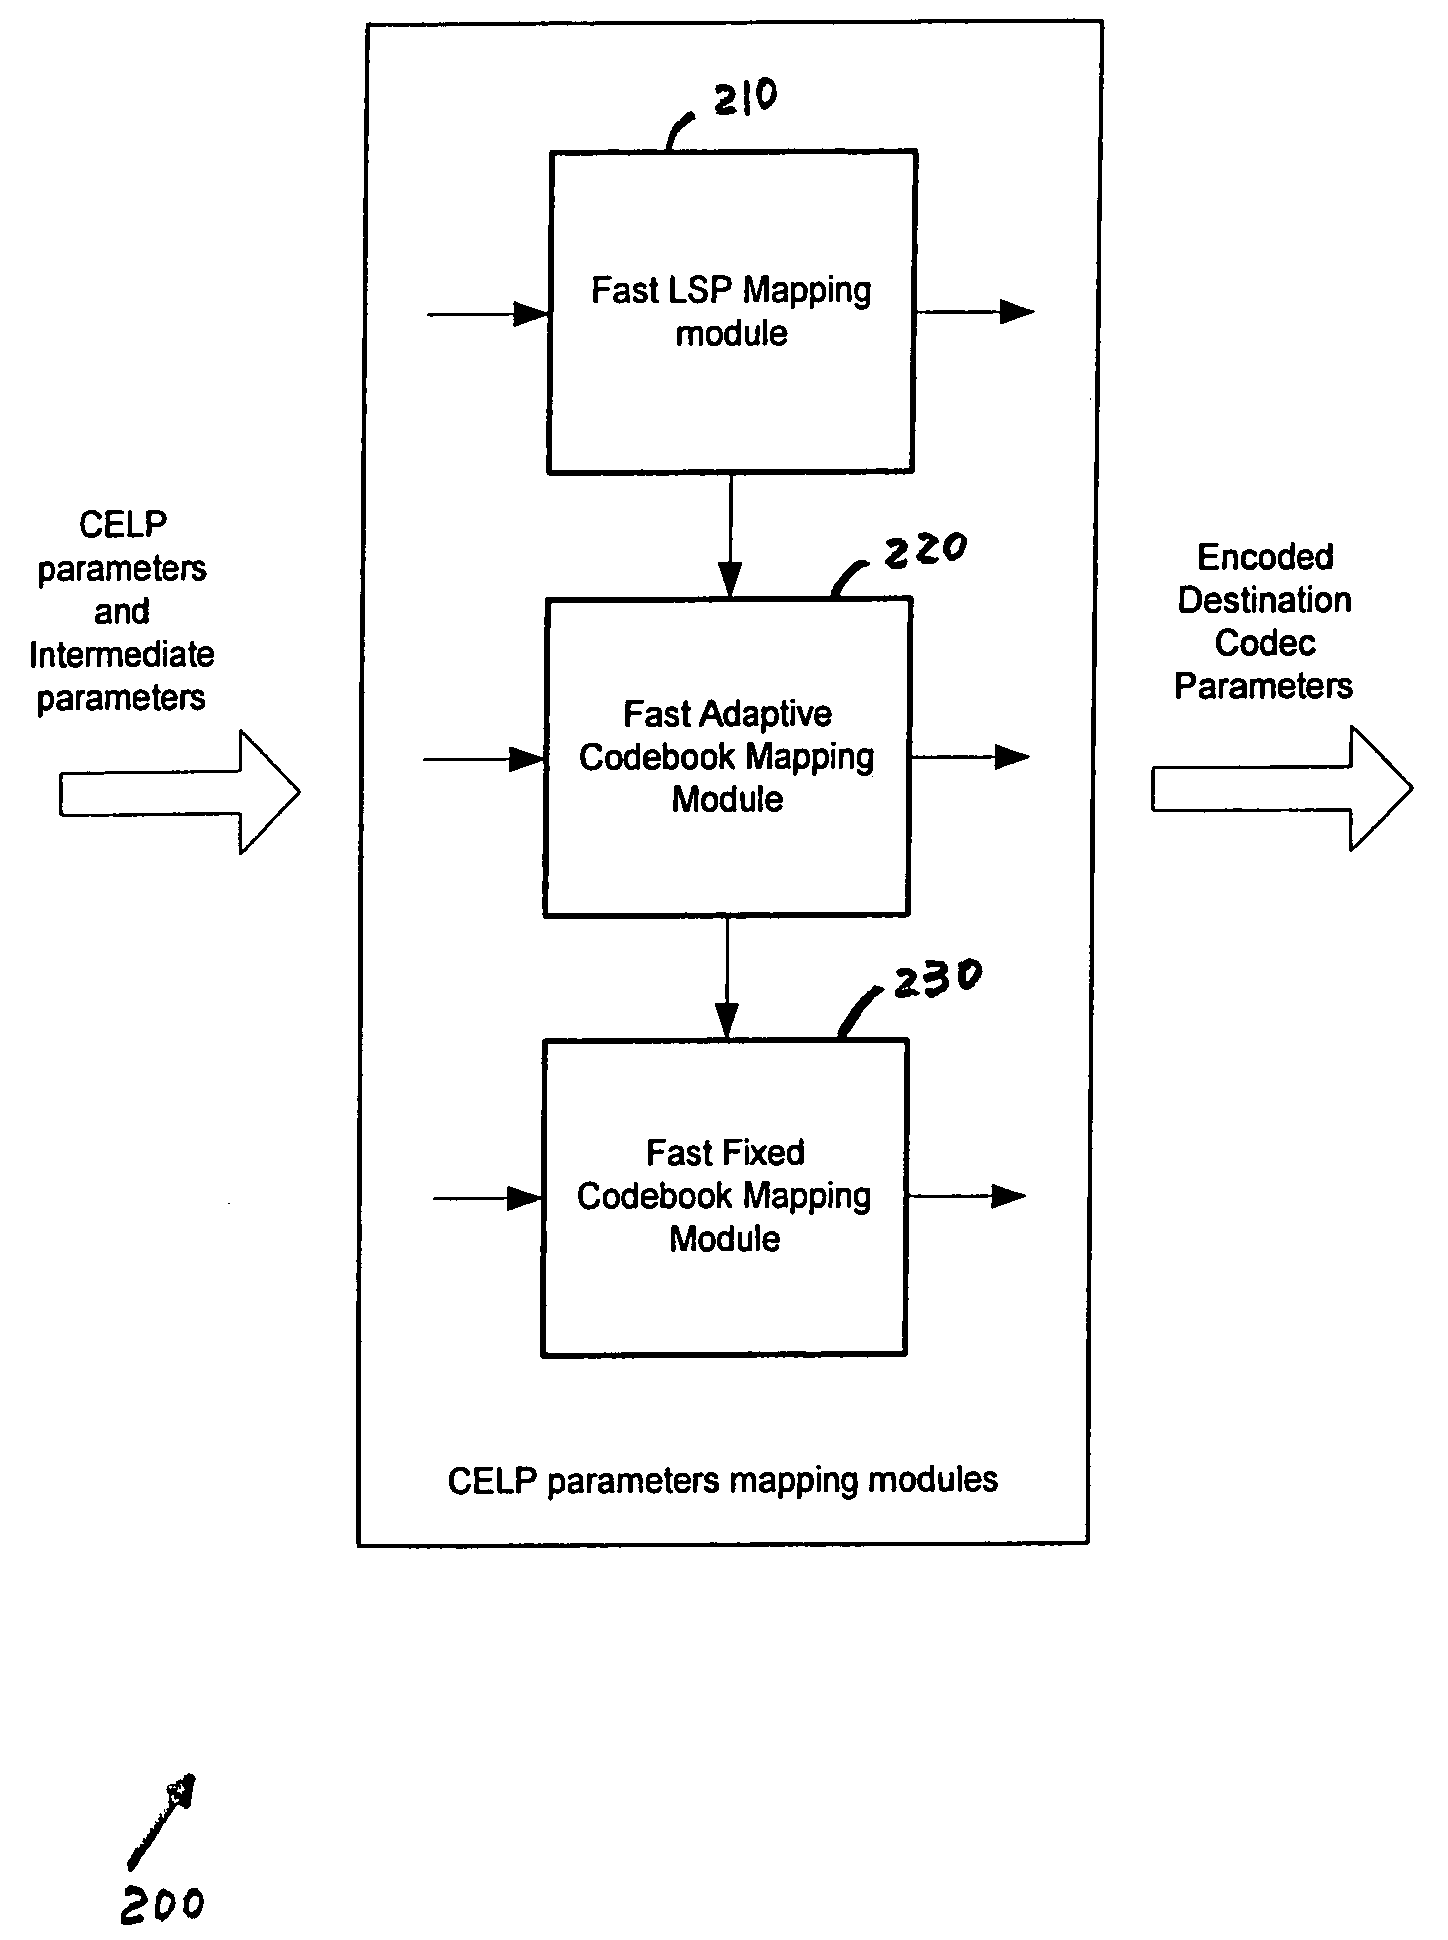 Method and apparatus for fast CELP parameter mapping